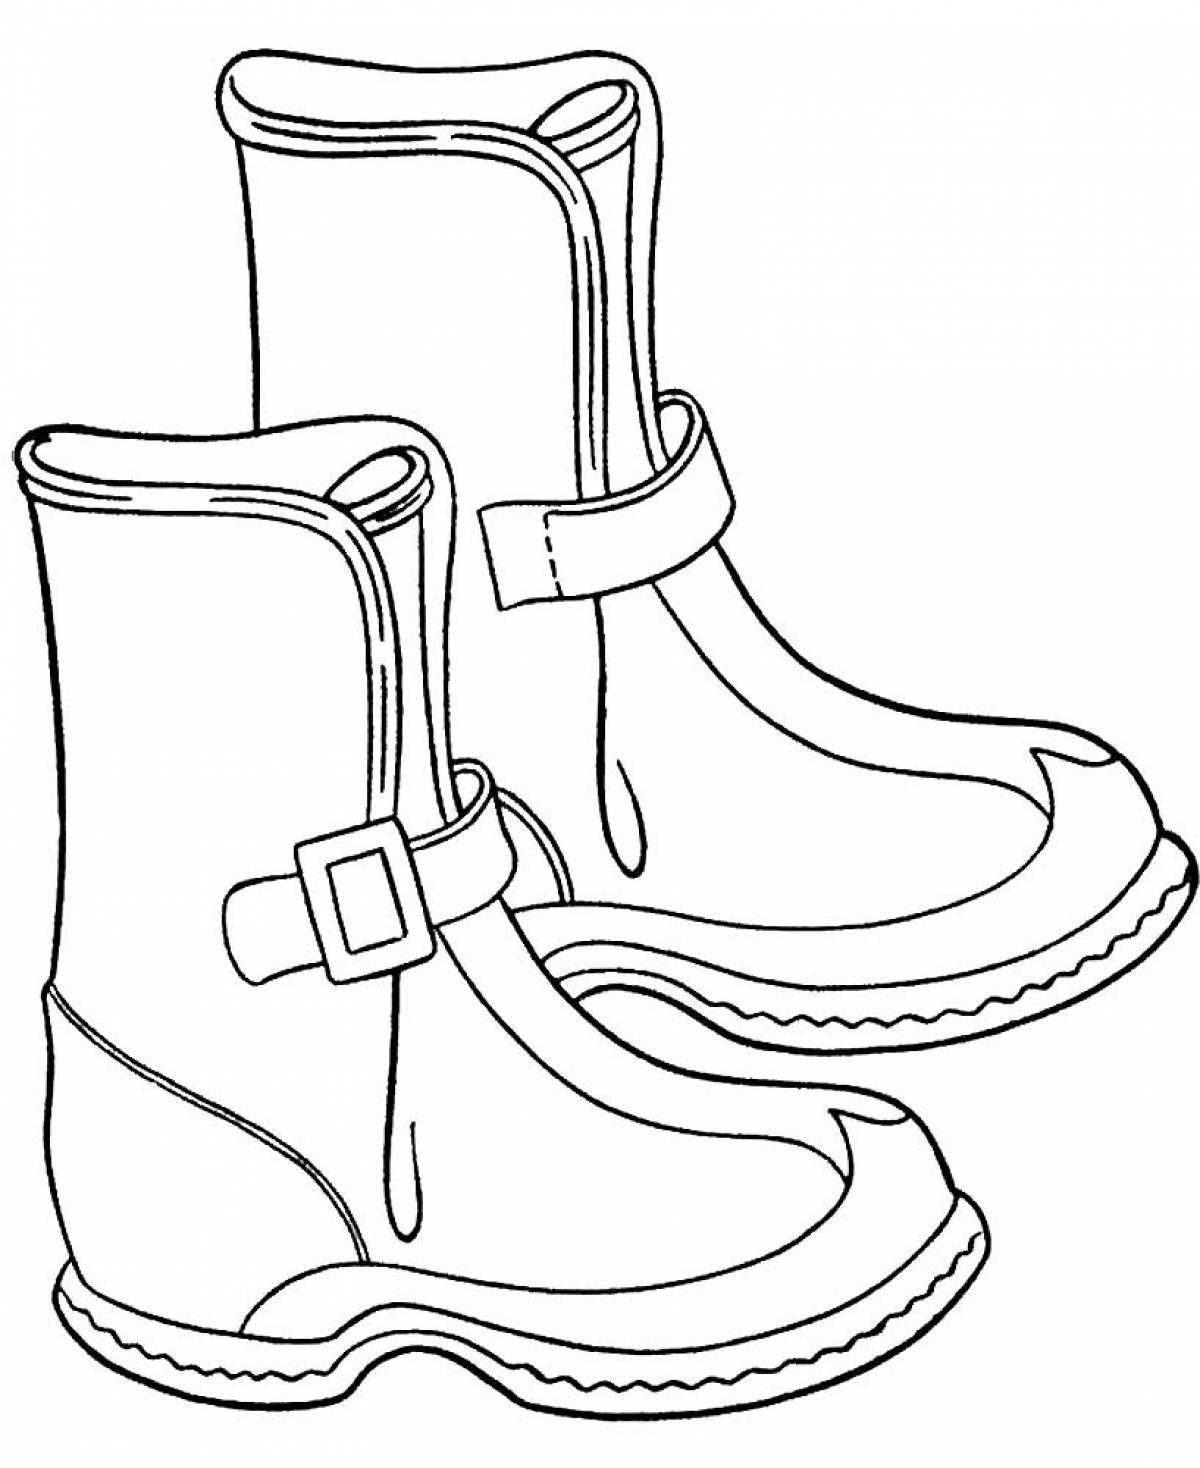 Boots with a clasp